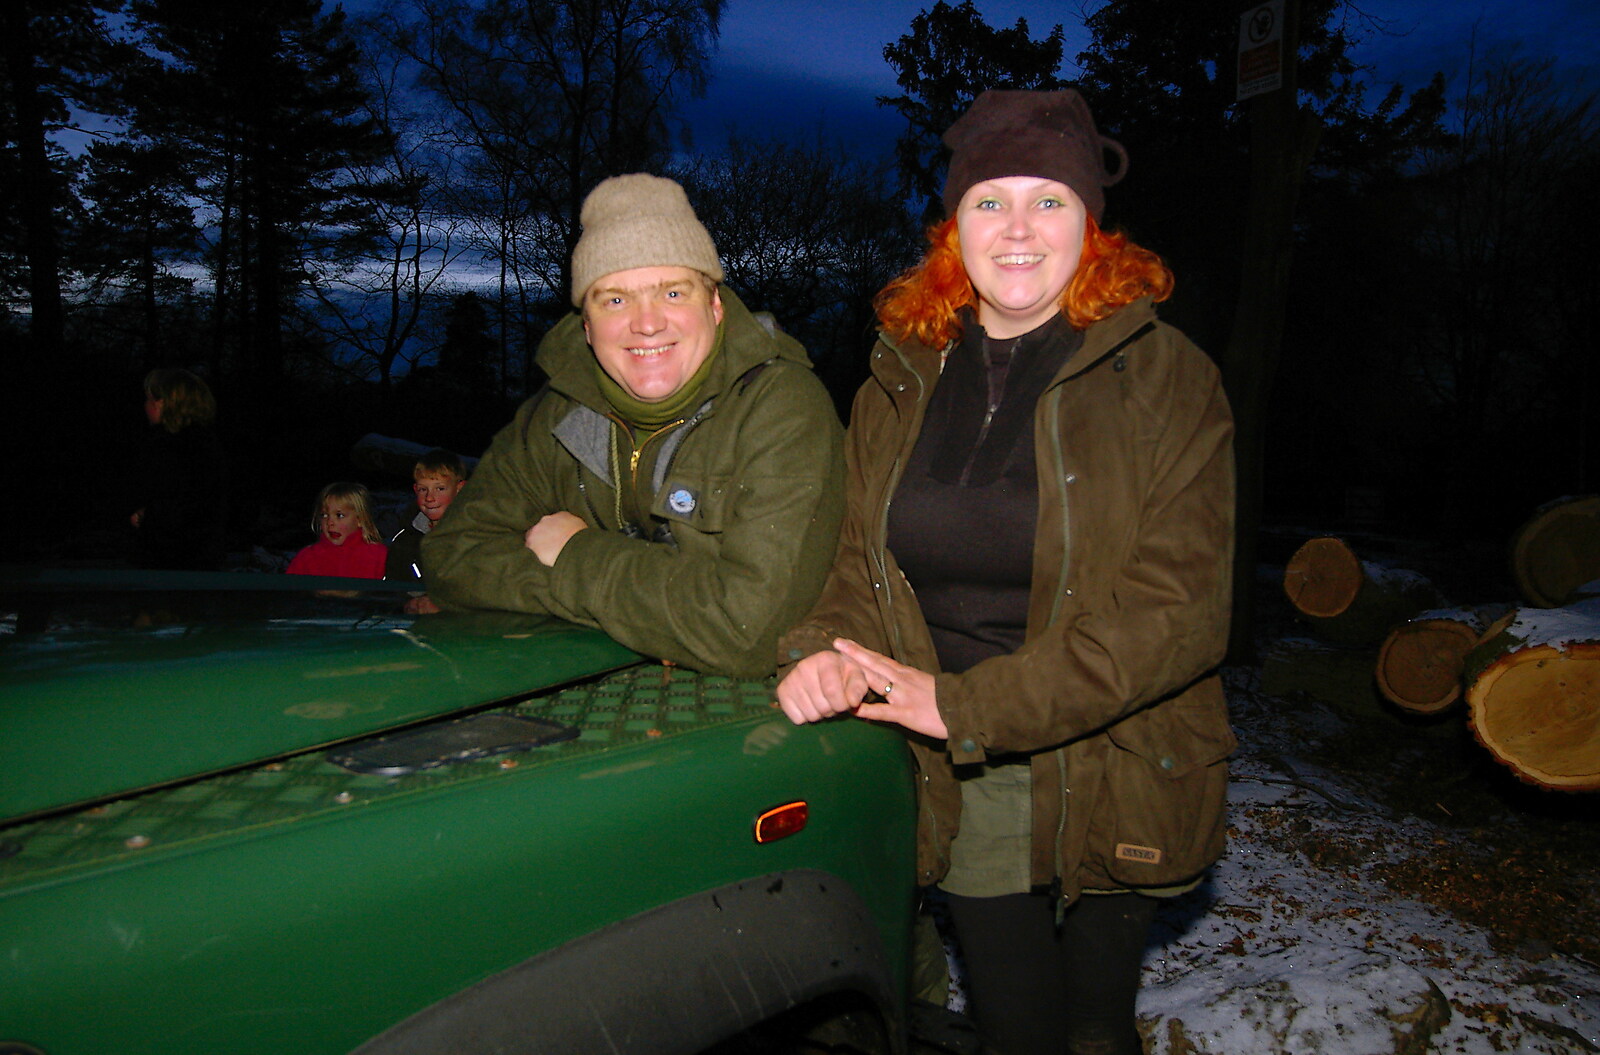 A photo with Ray Mears from Walk Like a Shadow: A Day With Ray Mears, Ashdown Forest, East Sussex - 29th December 2005